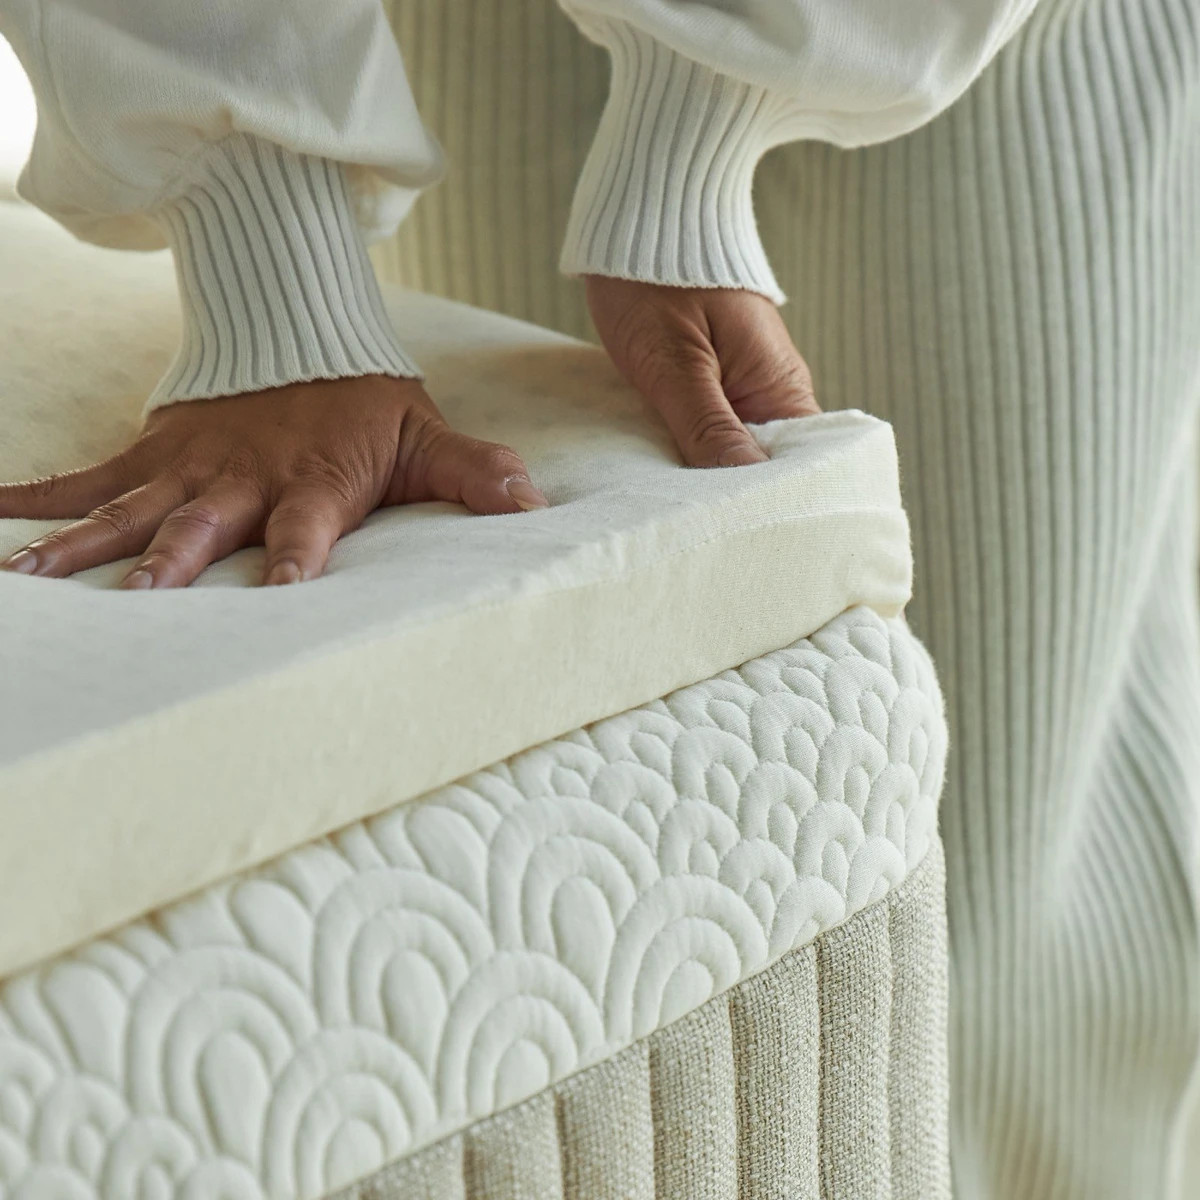 is the organic latex mattress topper comfortable?